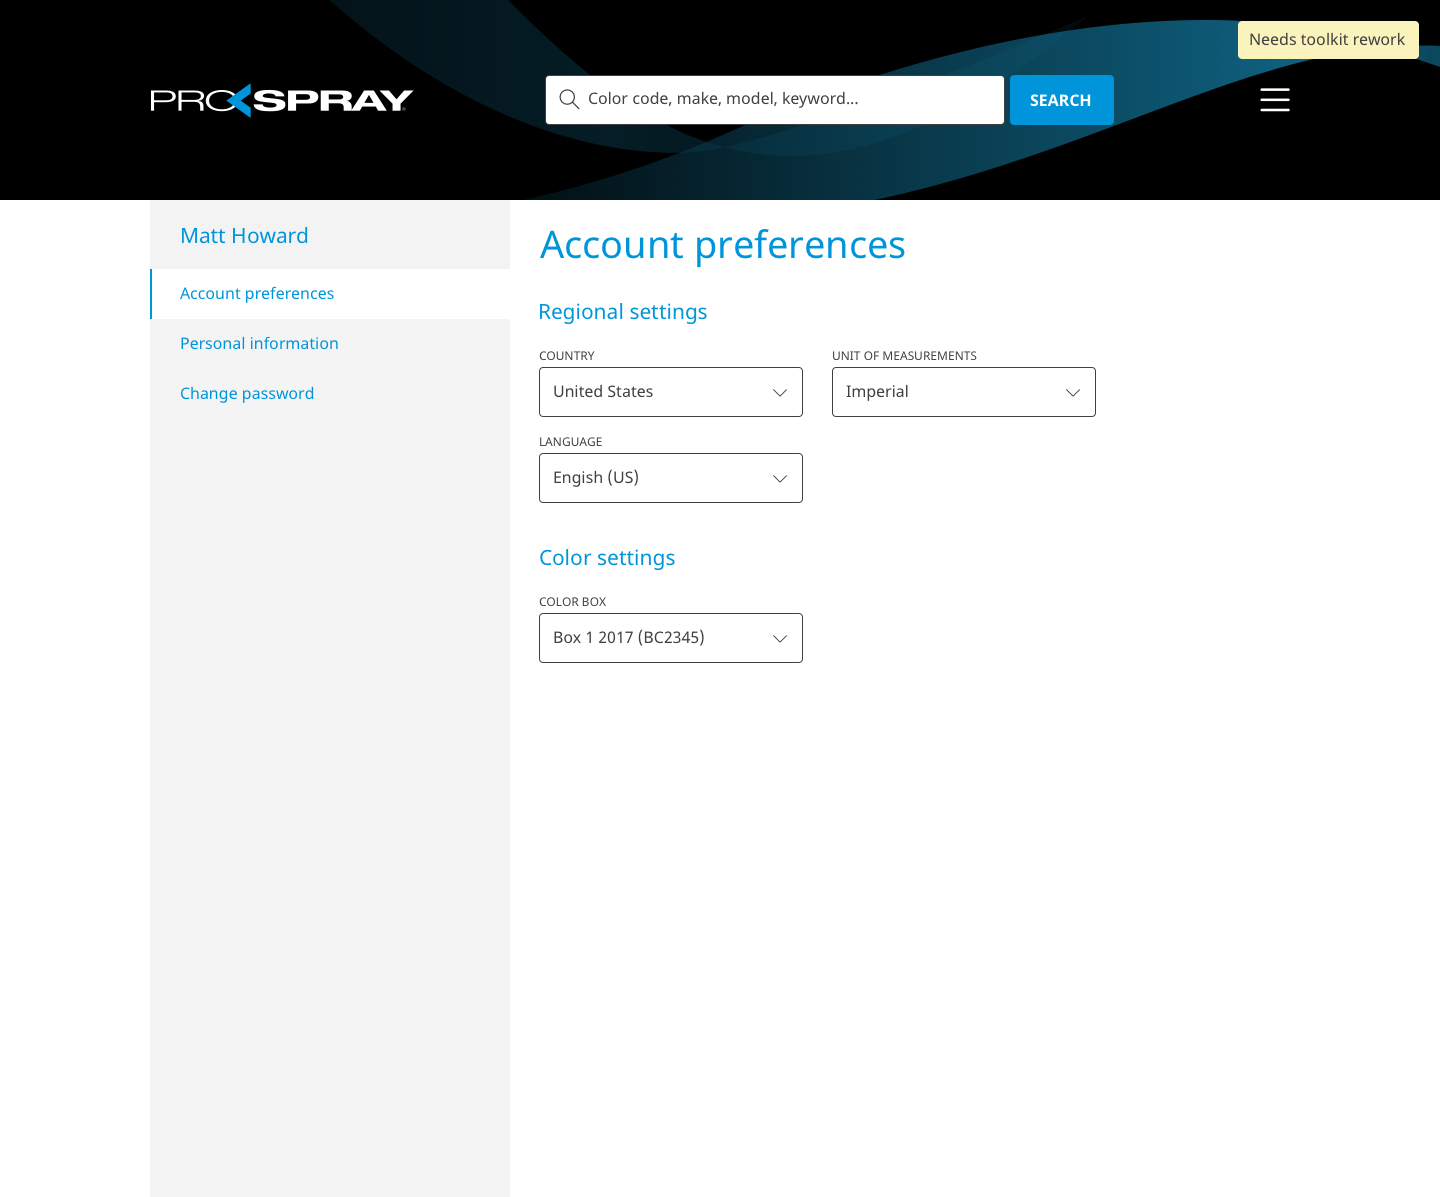 8.01 - Account preferences